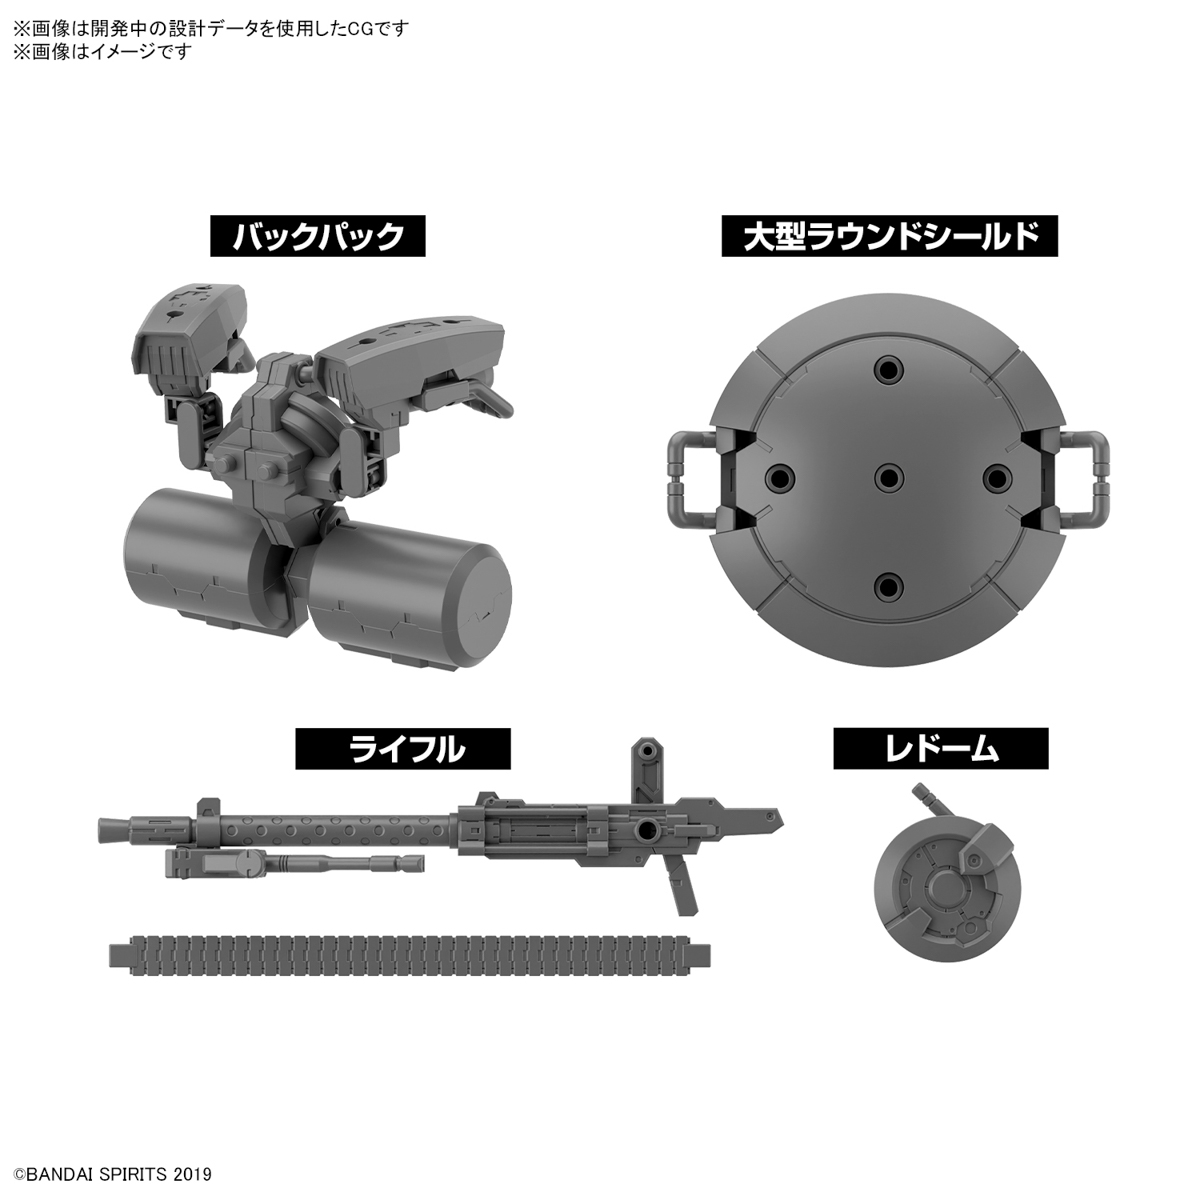 1/144 30MM Customized Weapons (Heavy Weapons 2) - 03